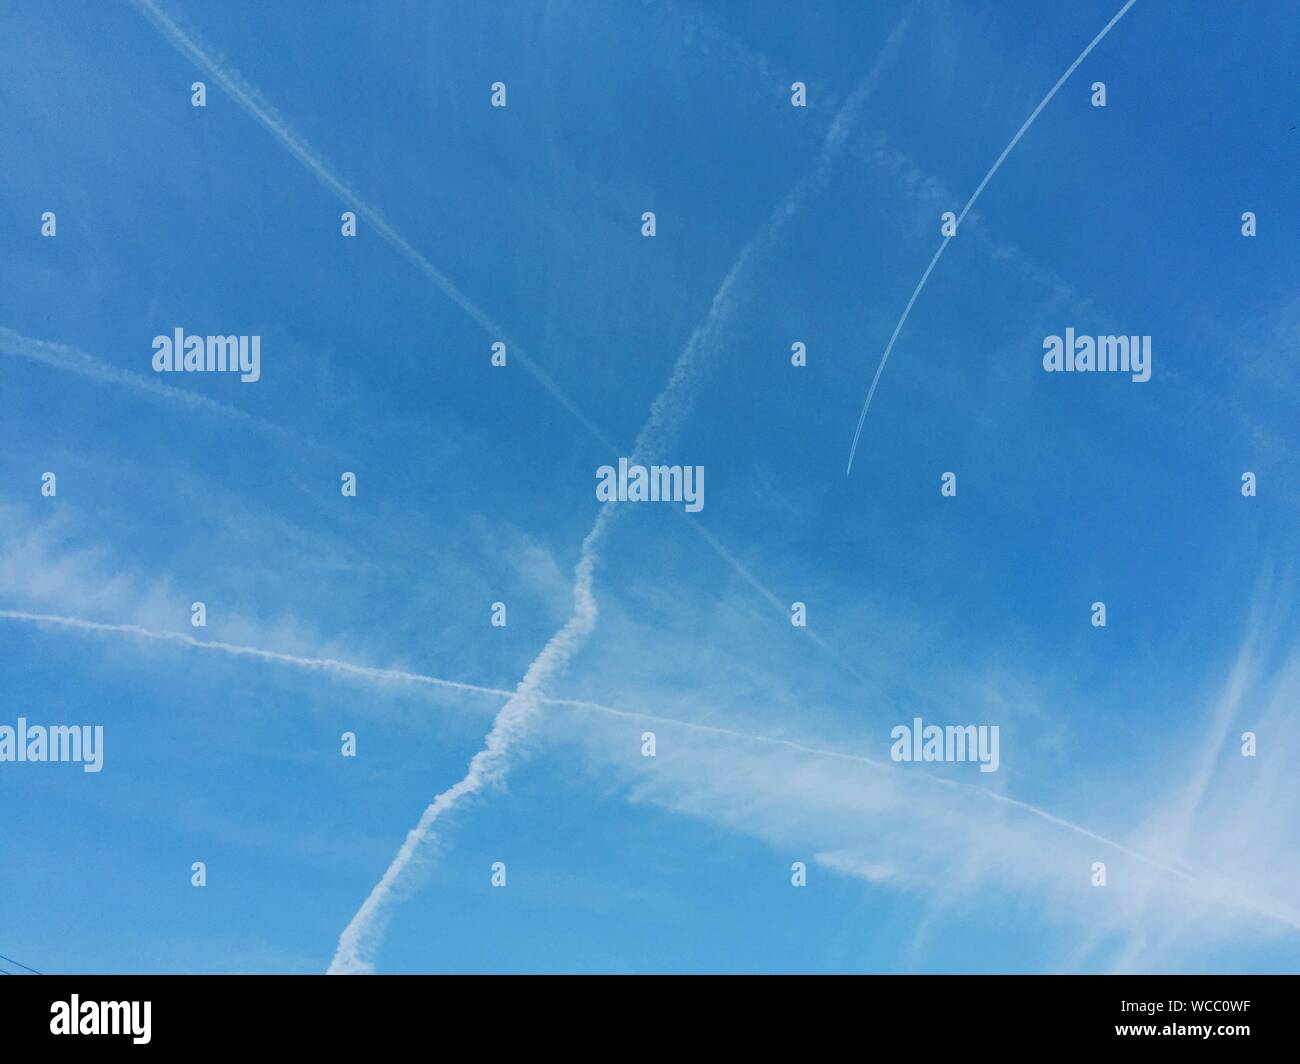 Low Angle View Of Vapor Trails Against Blue Sky Stock Photo